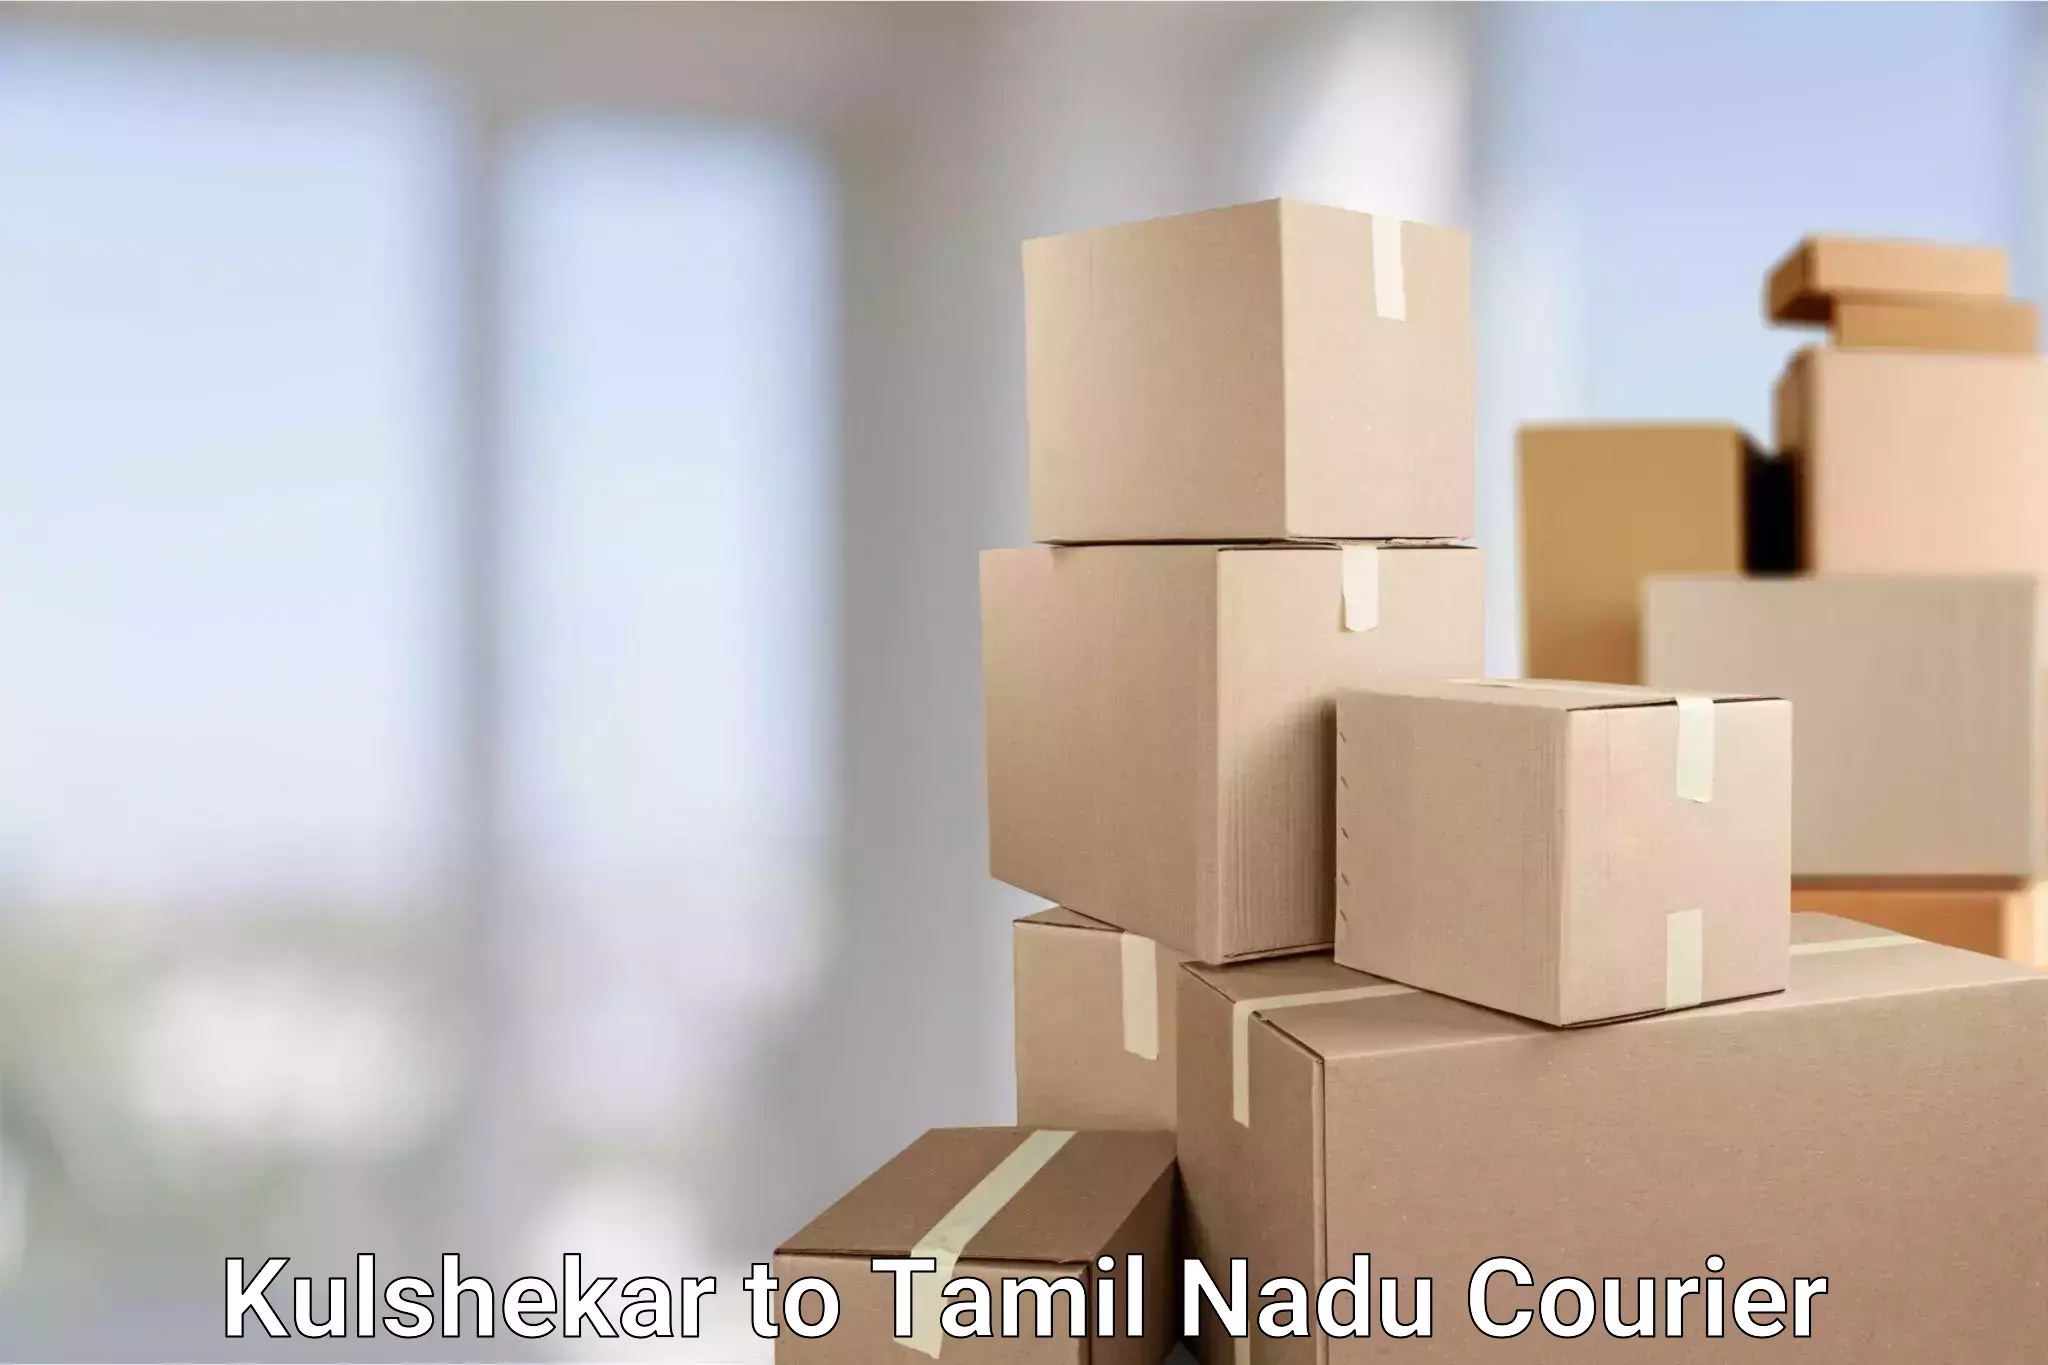 Cost-effective courier options Kulshekar to Tamil Nadu